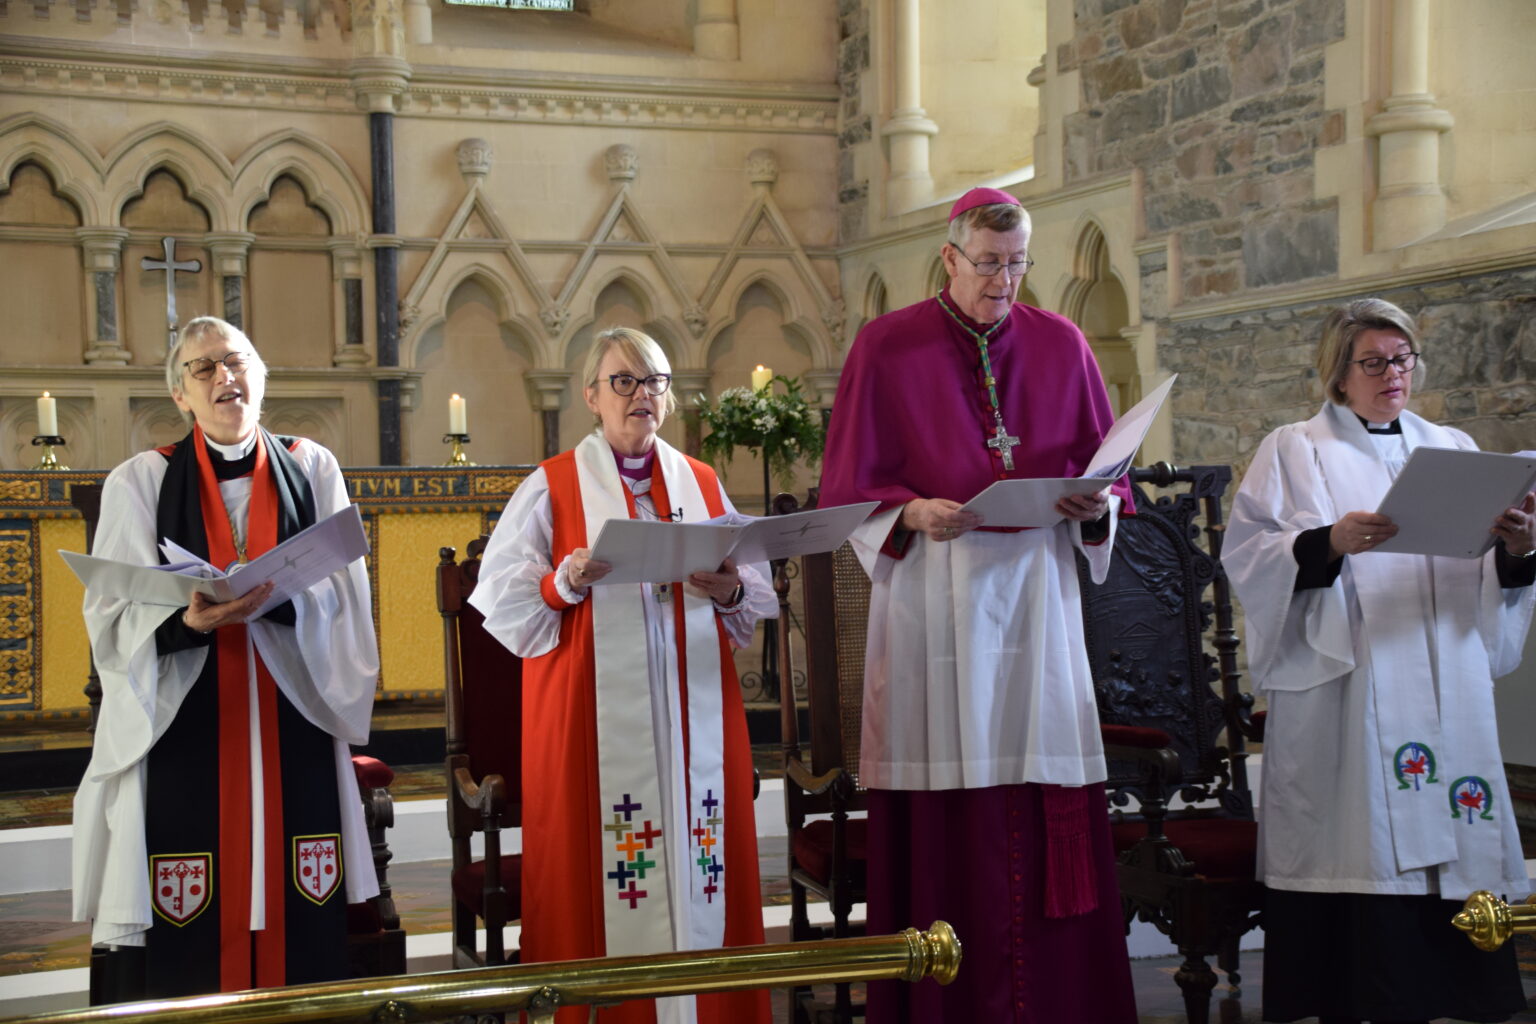 Canon Joyce, Bishop Pat Storey, Bishop Denis Nulty, and Dean Isobel Jackson participating in the service.